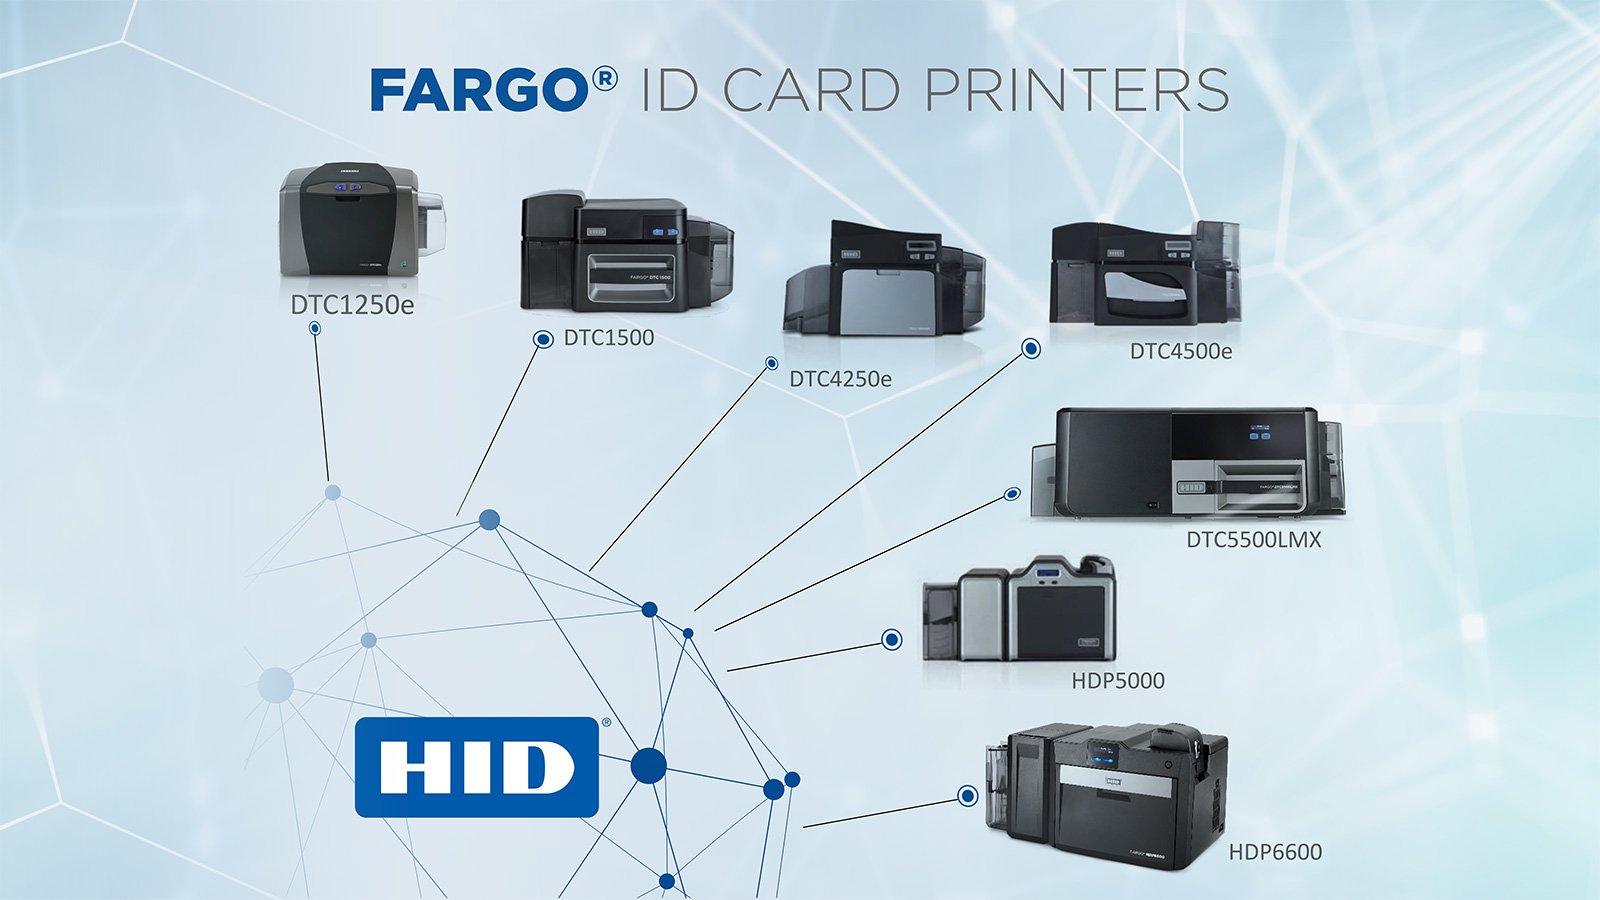 Overview of HID FARGO ID Card Printer Systems